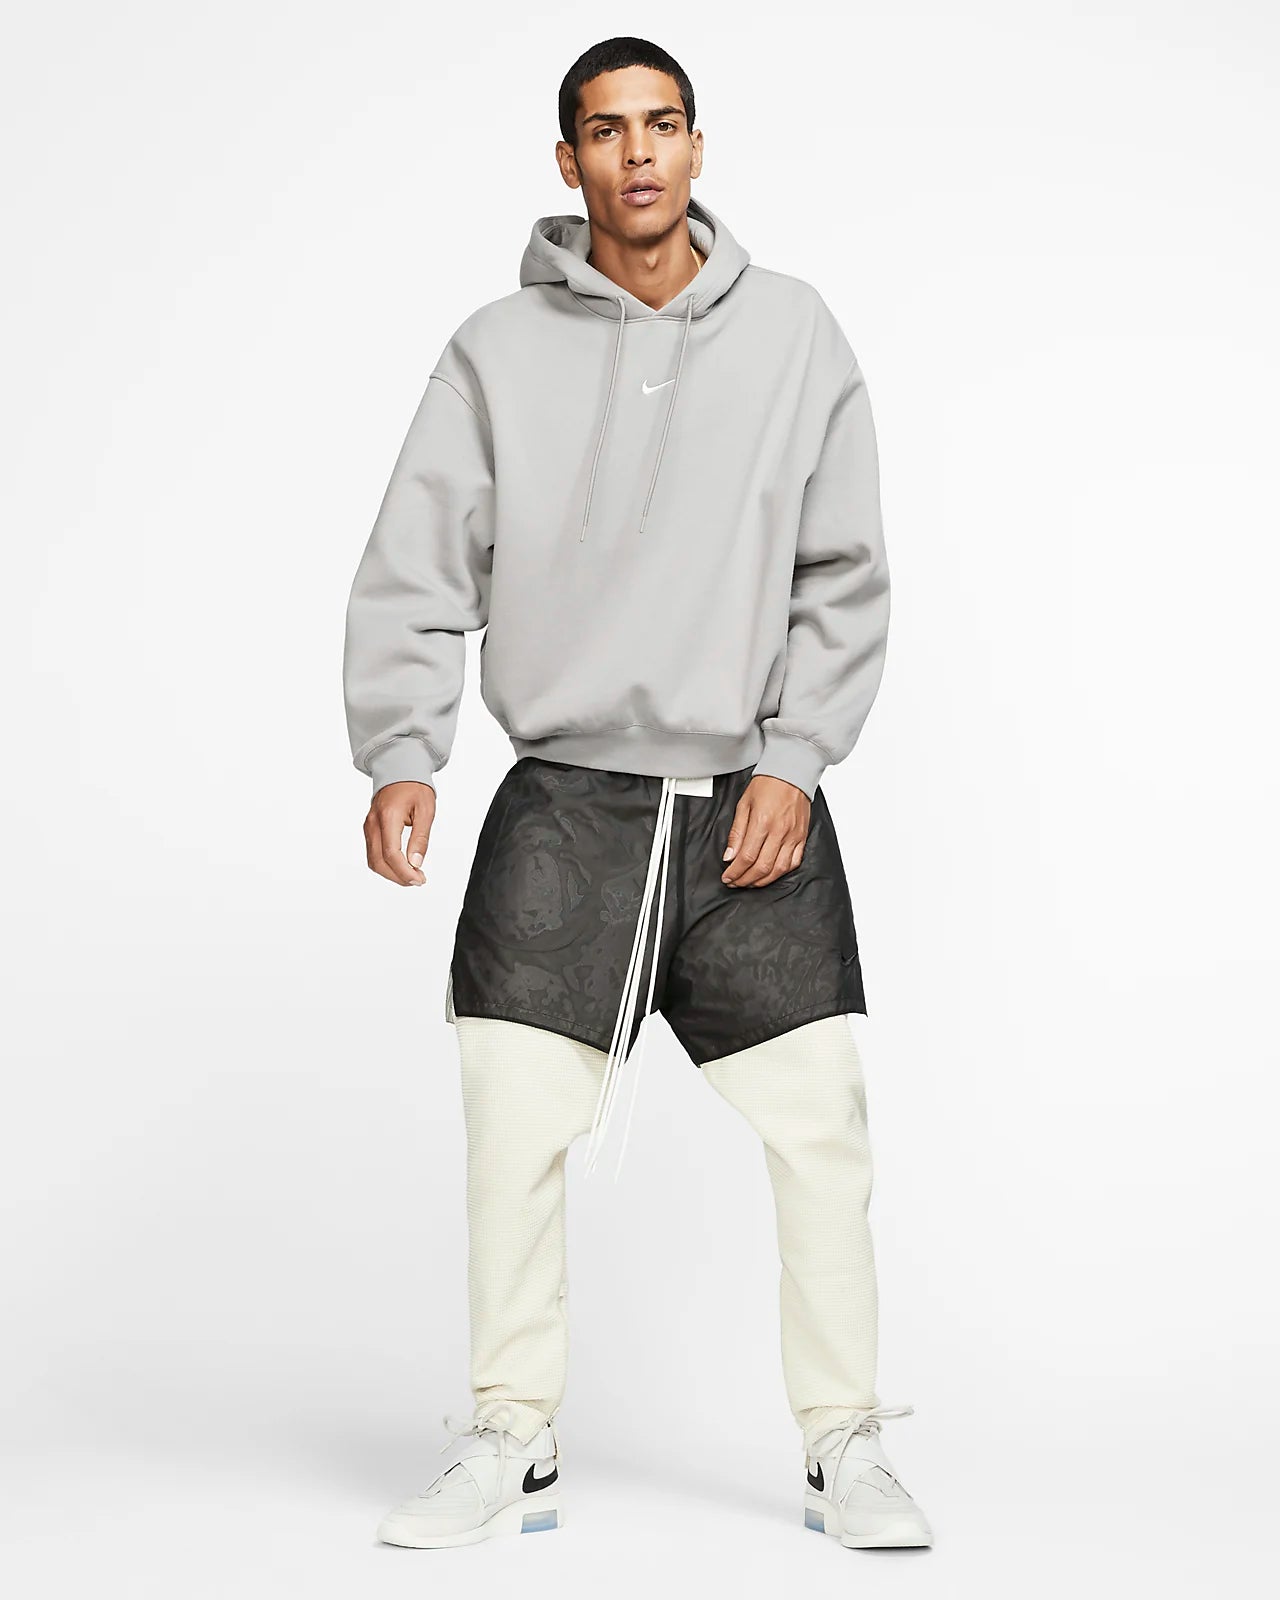 NIKE FEAR OF GOD DOUBLE THE COLLECTION